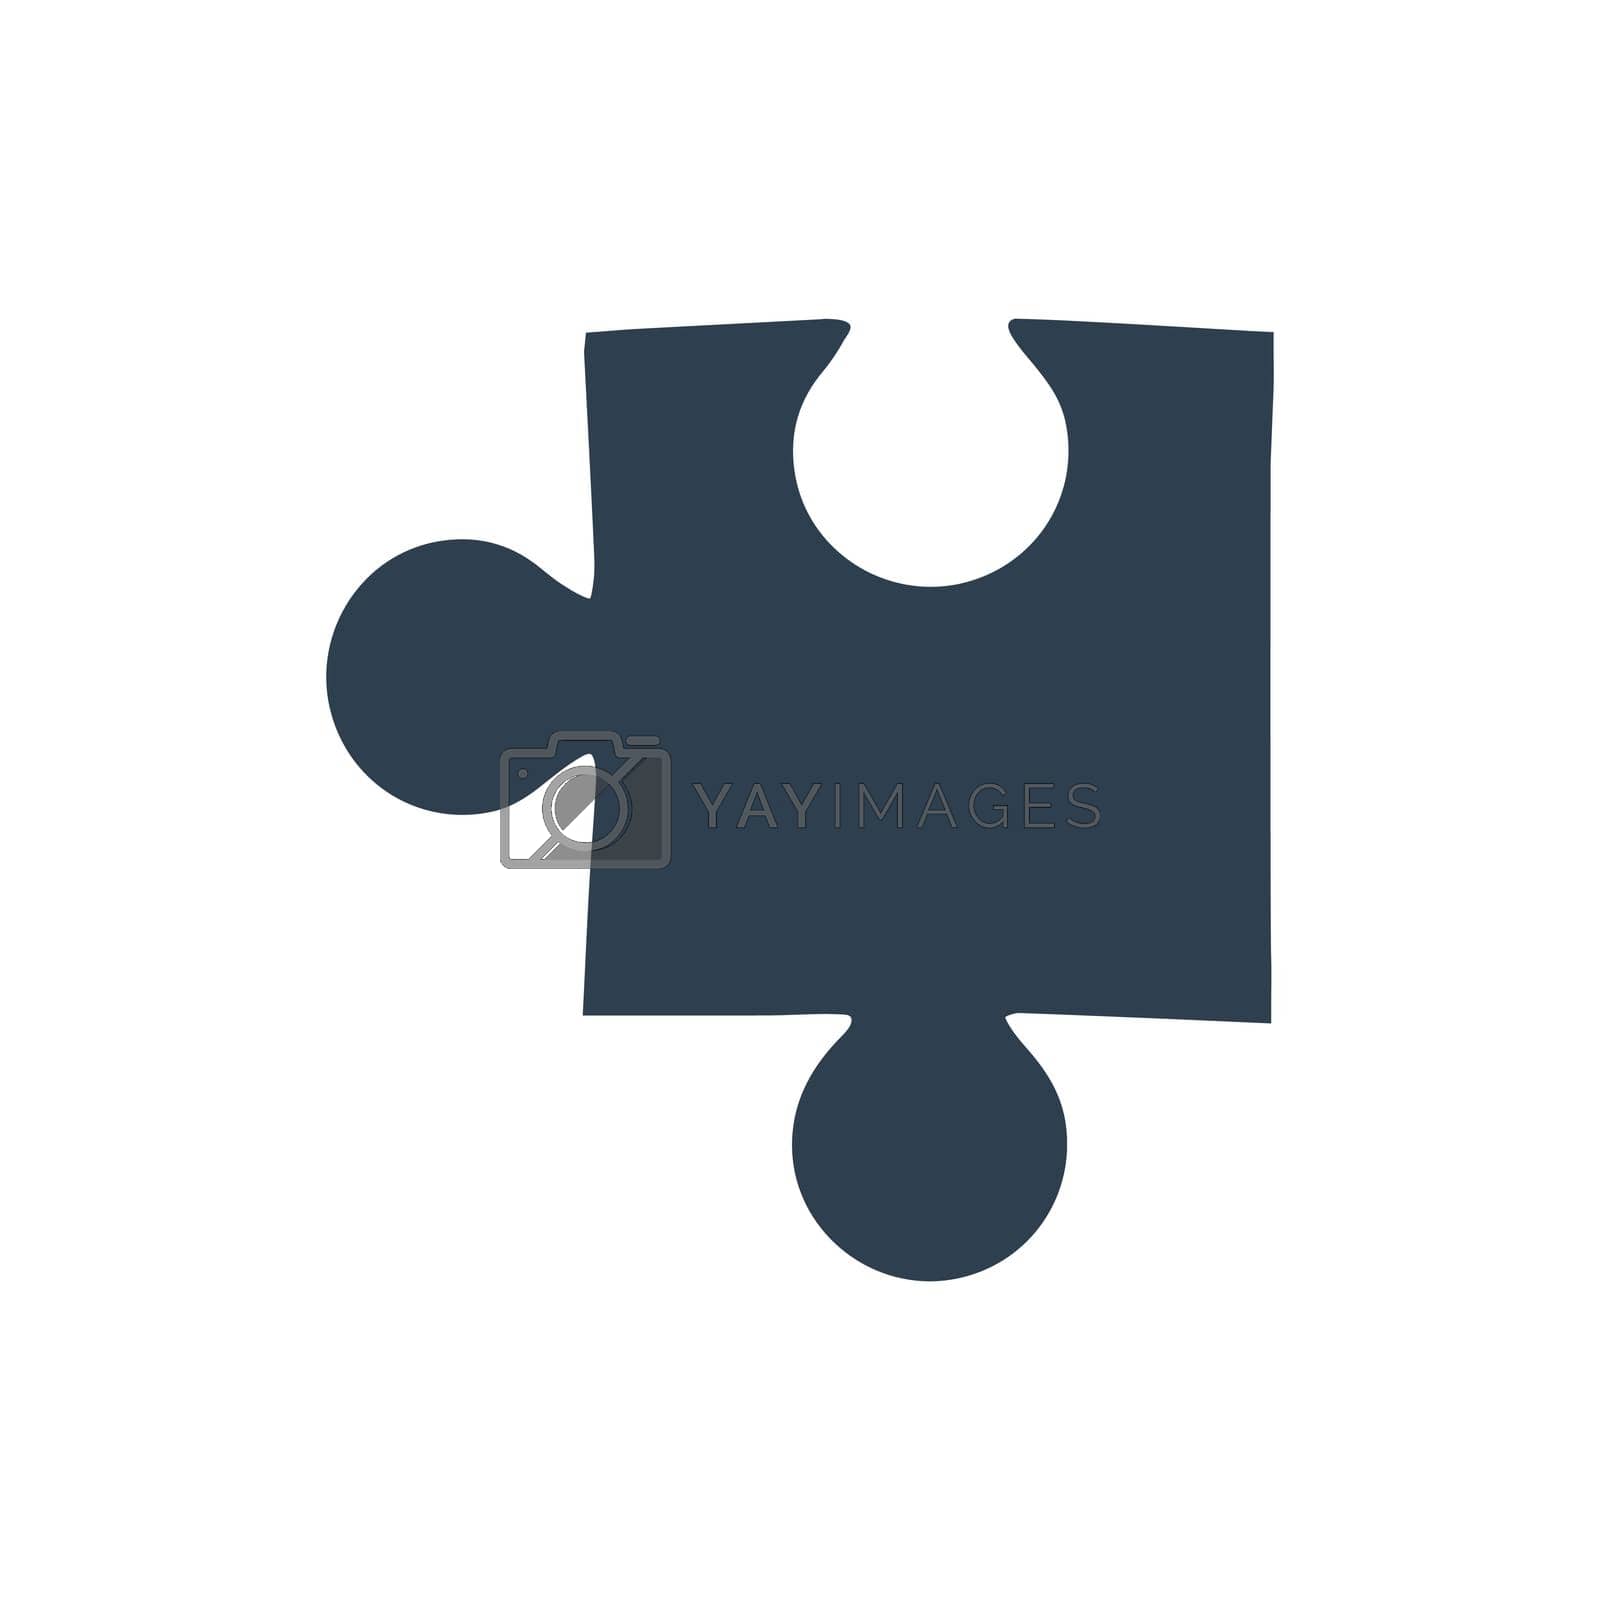 Royalty free image of Puzzle Icon by delwar018